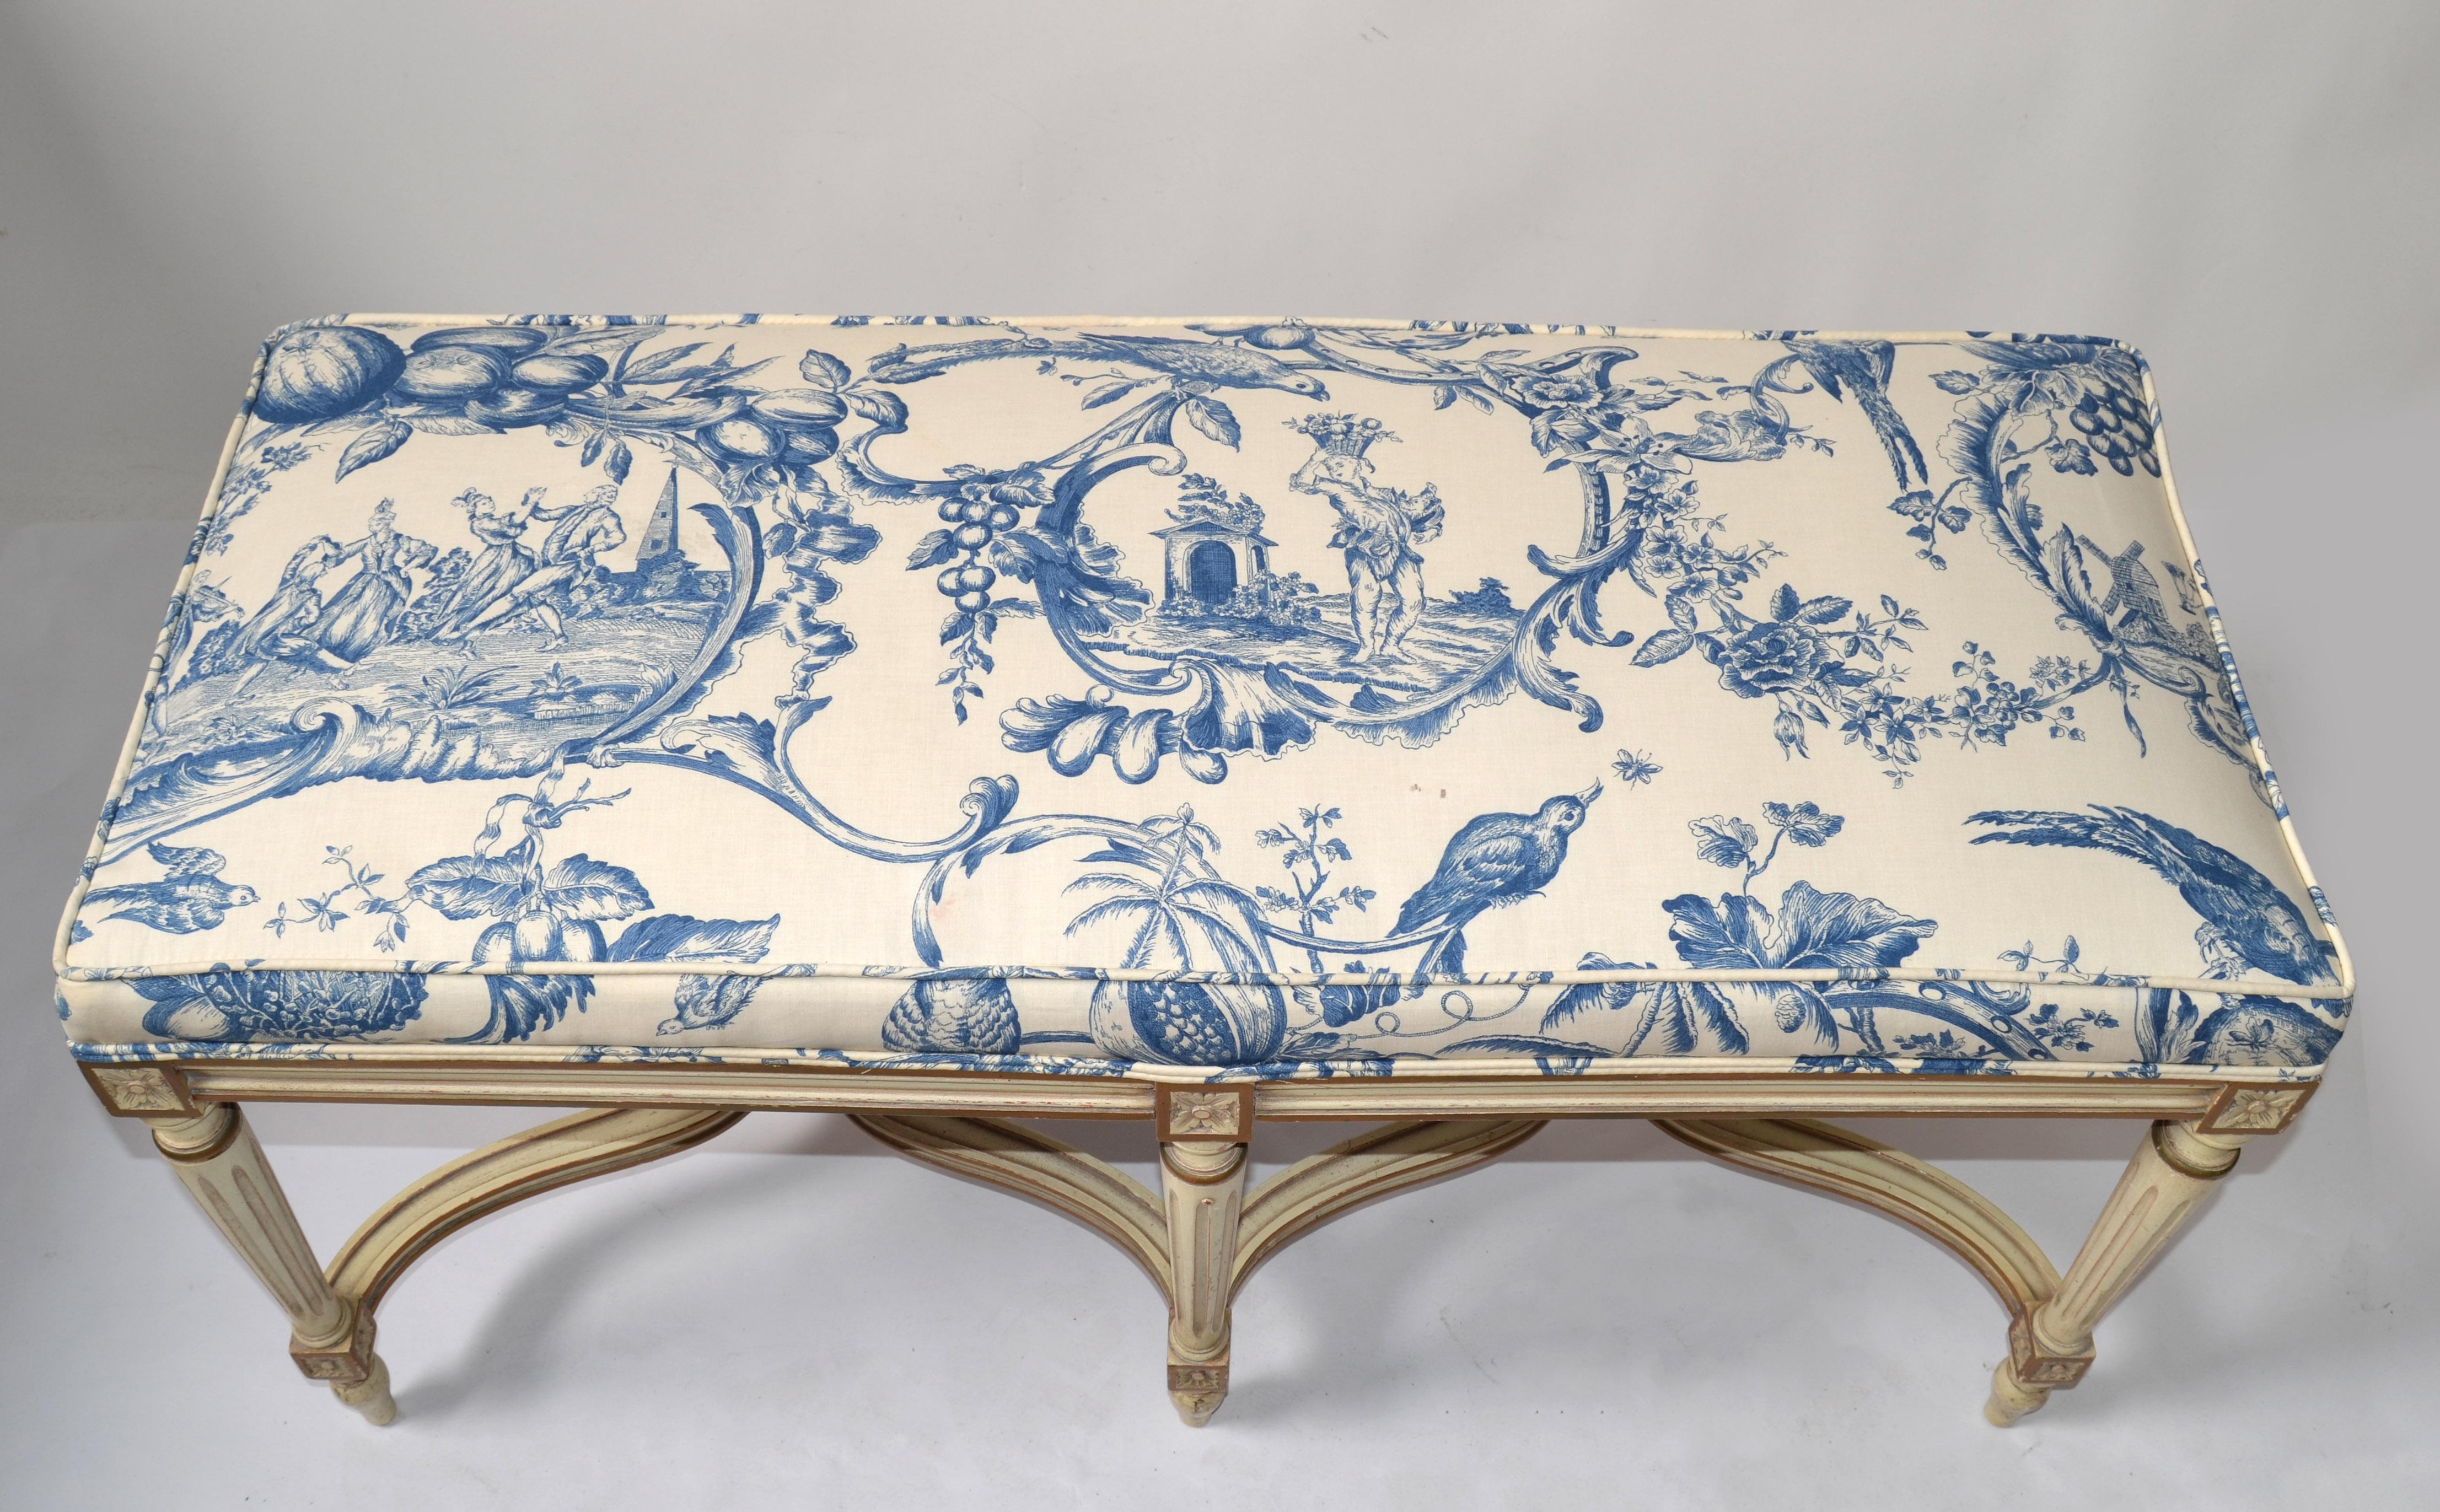 20th Century Louis XVI Bench Karges Furniture Co. Hand Carved Hardwood Blue Motif Fabric For Sale